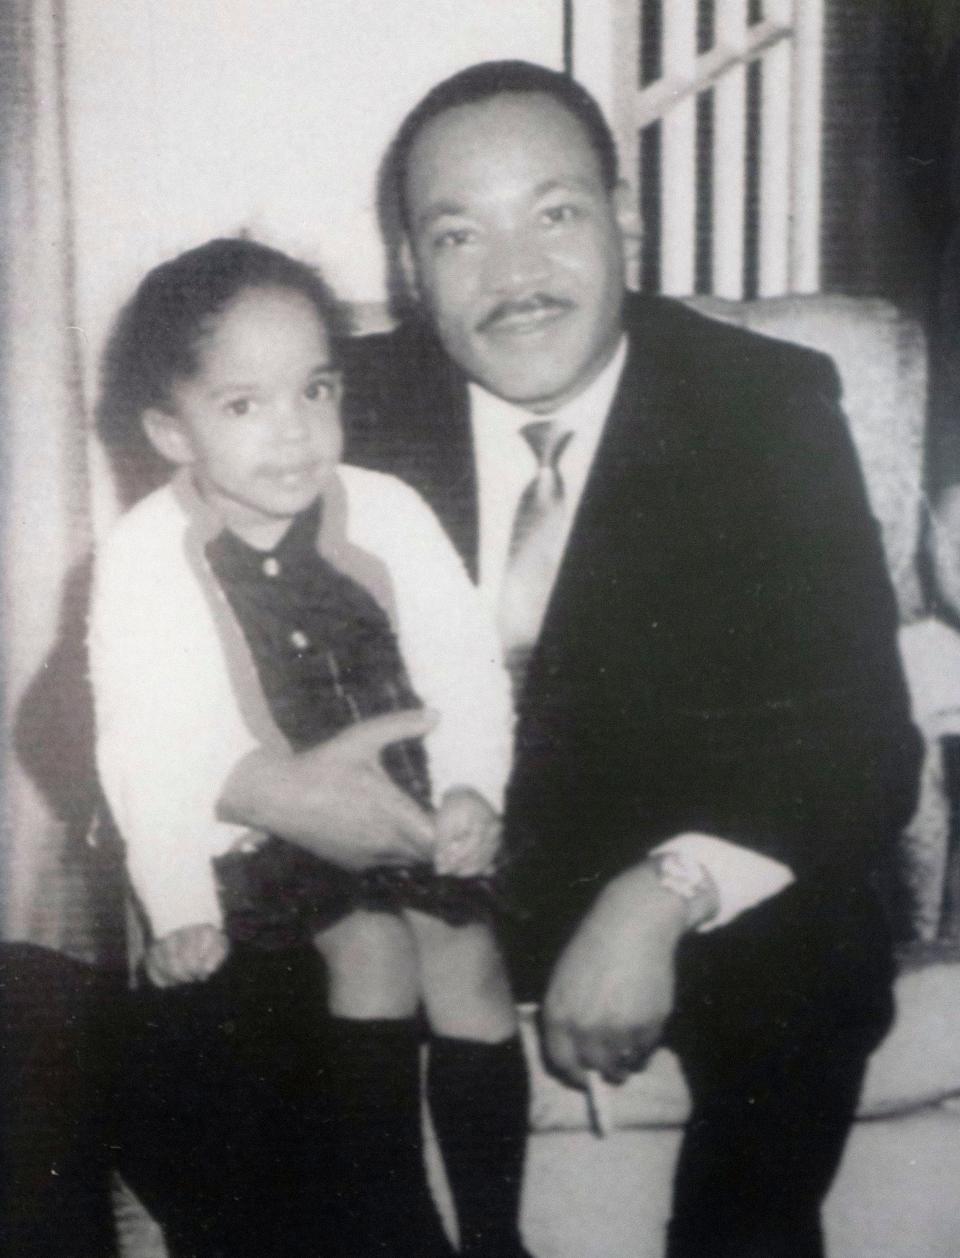 Dr. Martin Luther King, Jr. holds Jawana Jackson on his knee when she was four years old at her family's home. The Jackson and King families were very close friends, said Jackson. Much of King's Selman to Montgomery march was planned in her childhood home.